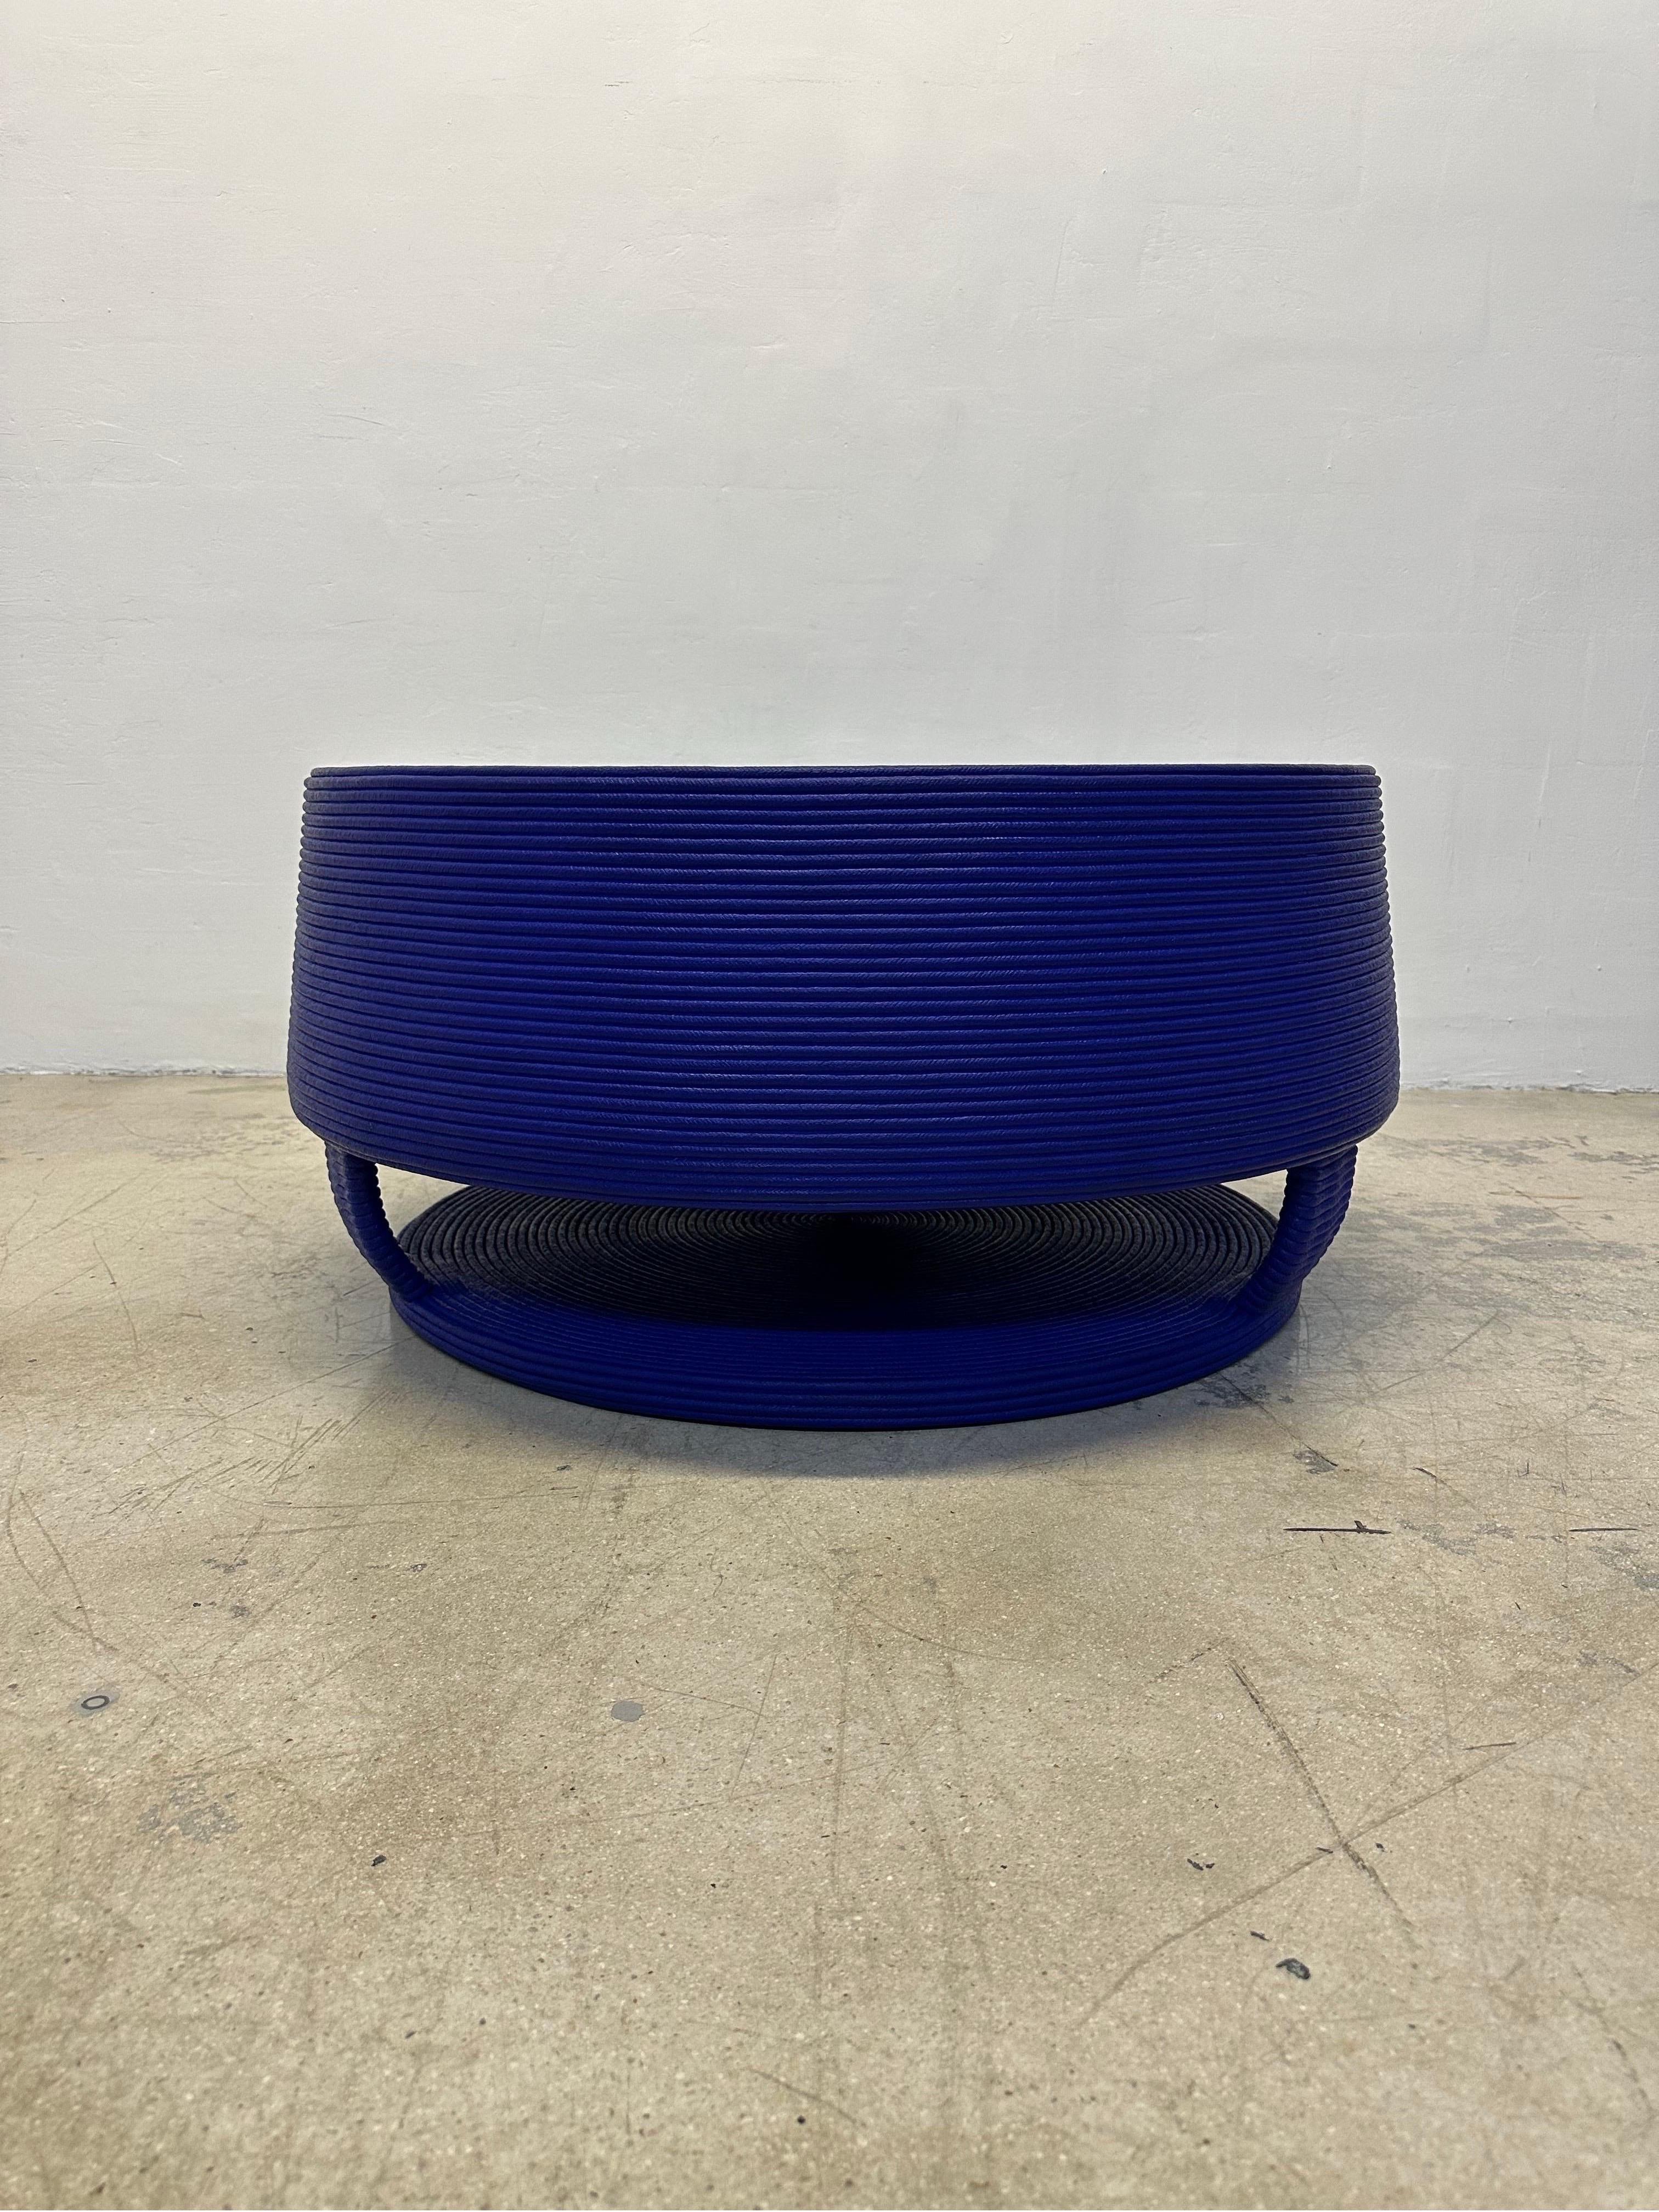 Tribal Christian Astuguevieille Afritamu Coffee Table With Yves Klein Blue Finish For Sale